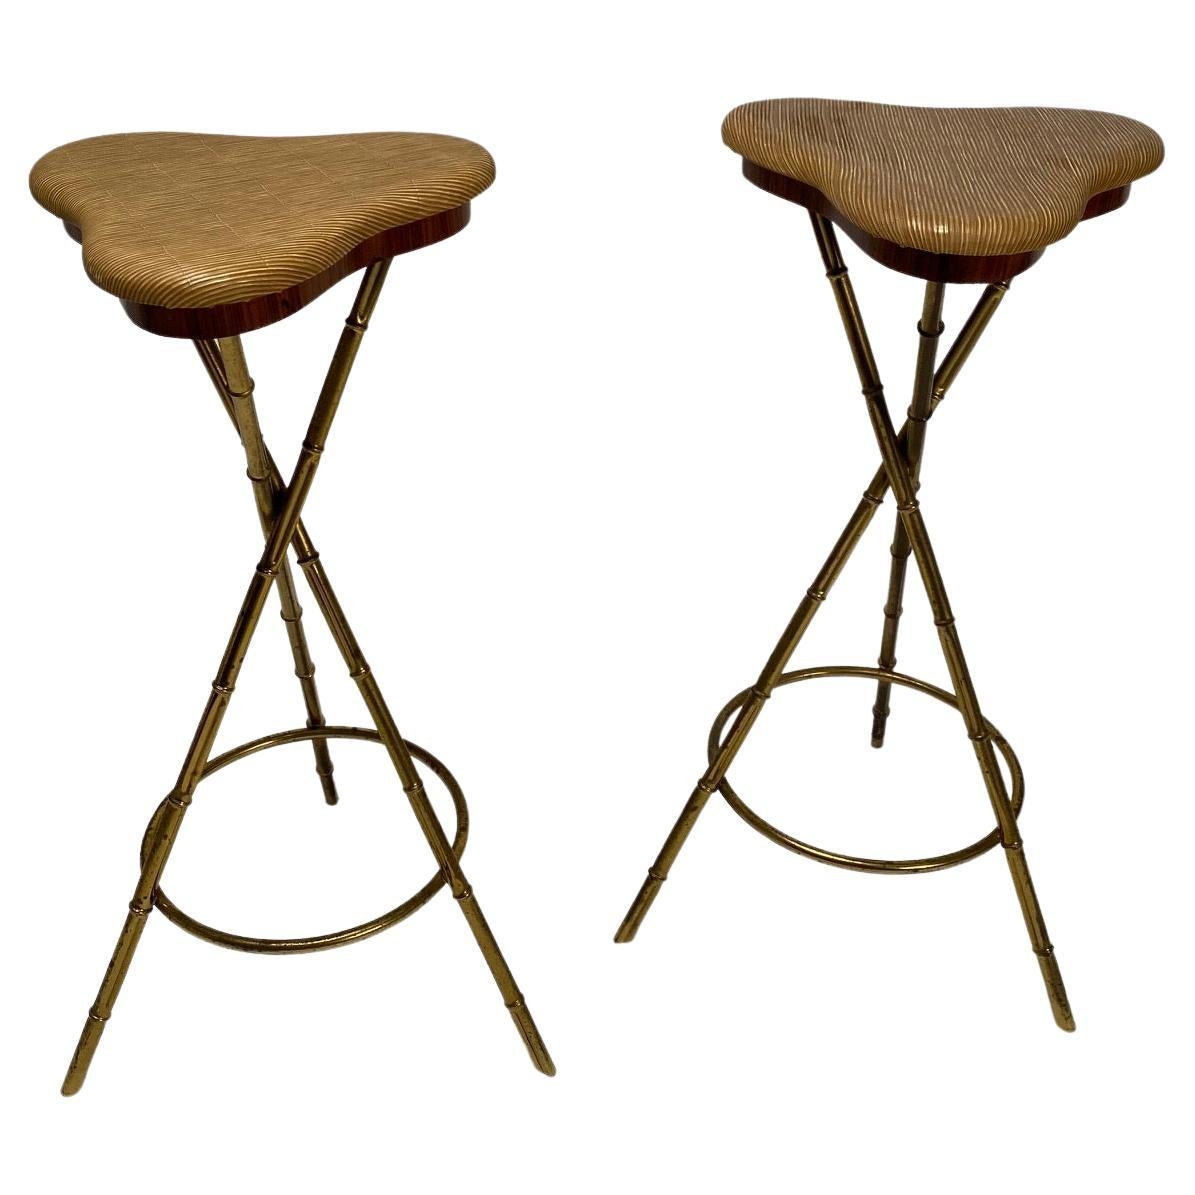 Refined pair of midcentury Italian bar stools with structure in wood and brass, coming from an important villa on como lake.
The brass workmanship that reproduces the bamboo cane motif is remarkable, as is the organic shape of the seat.
We